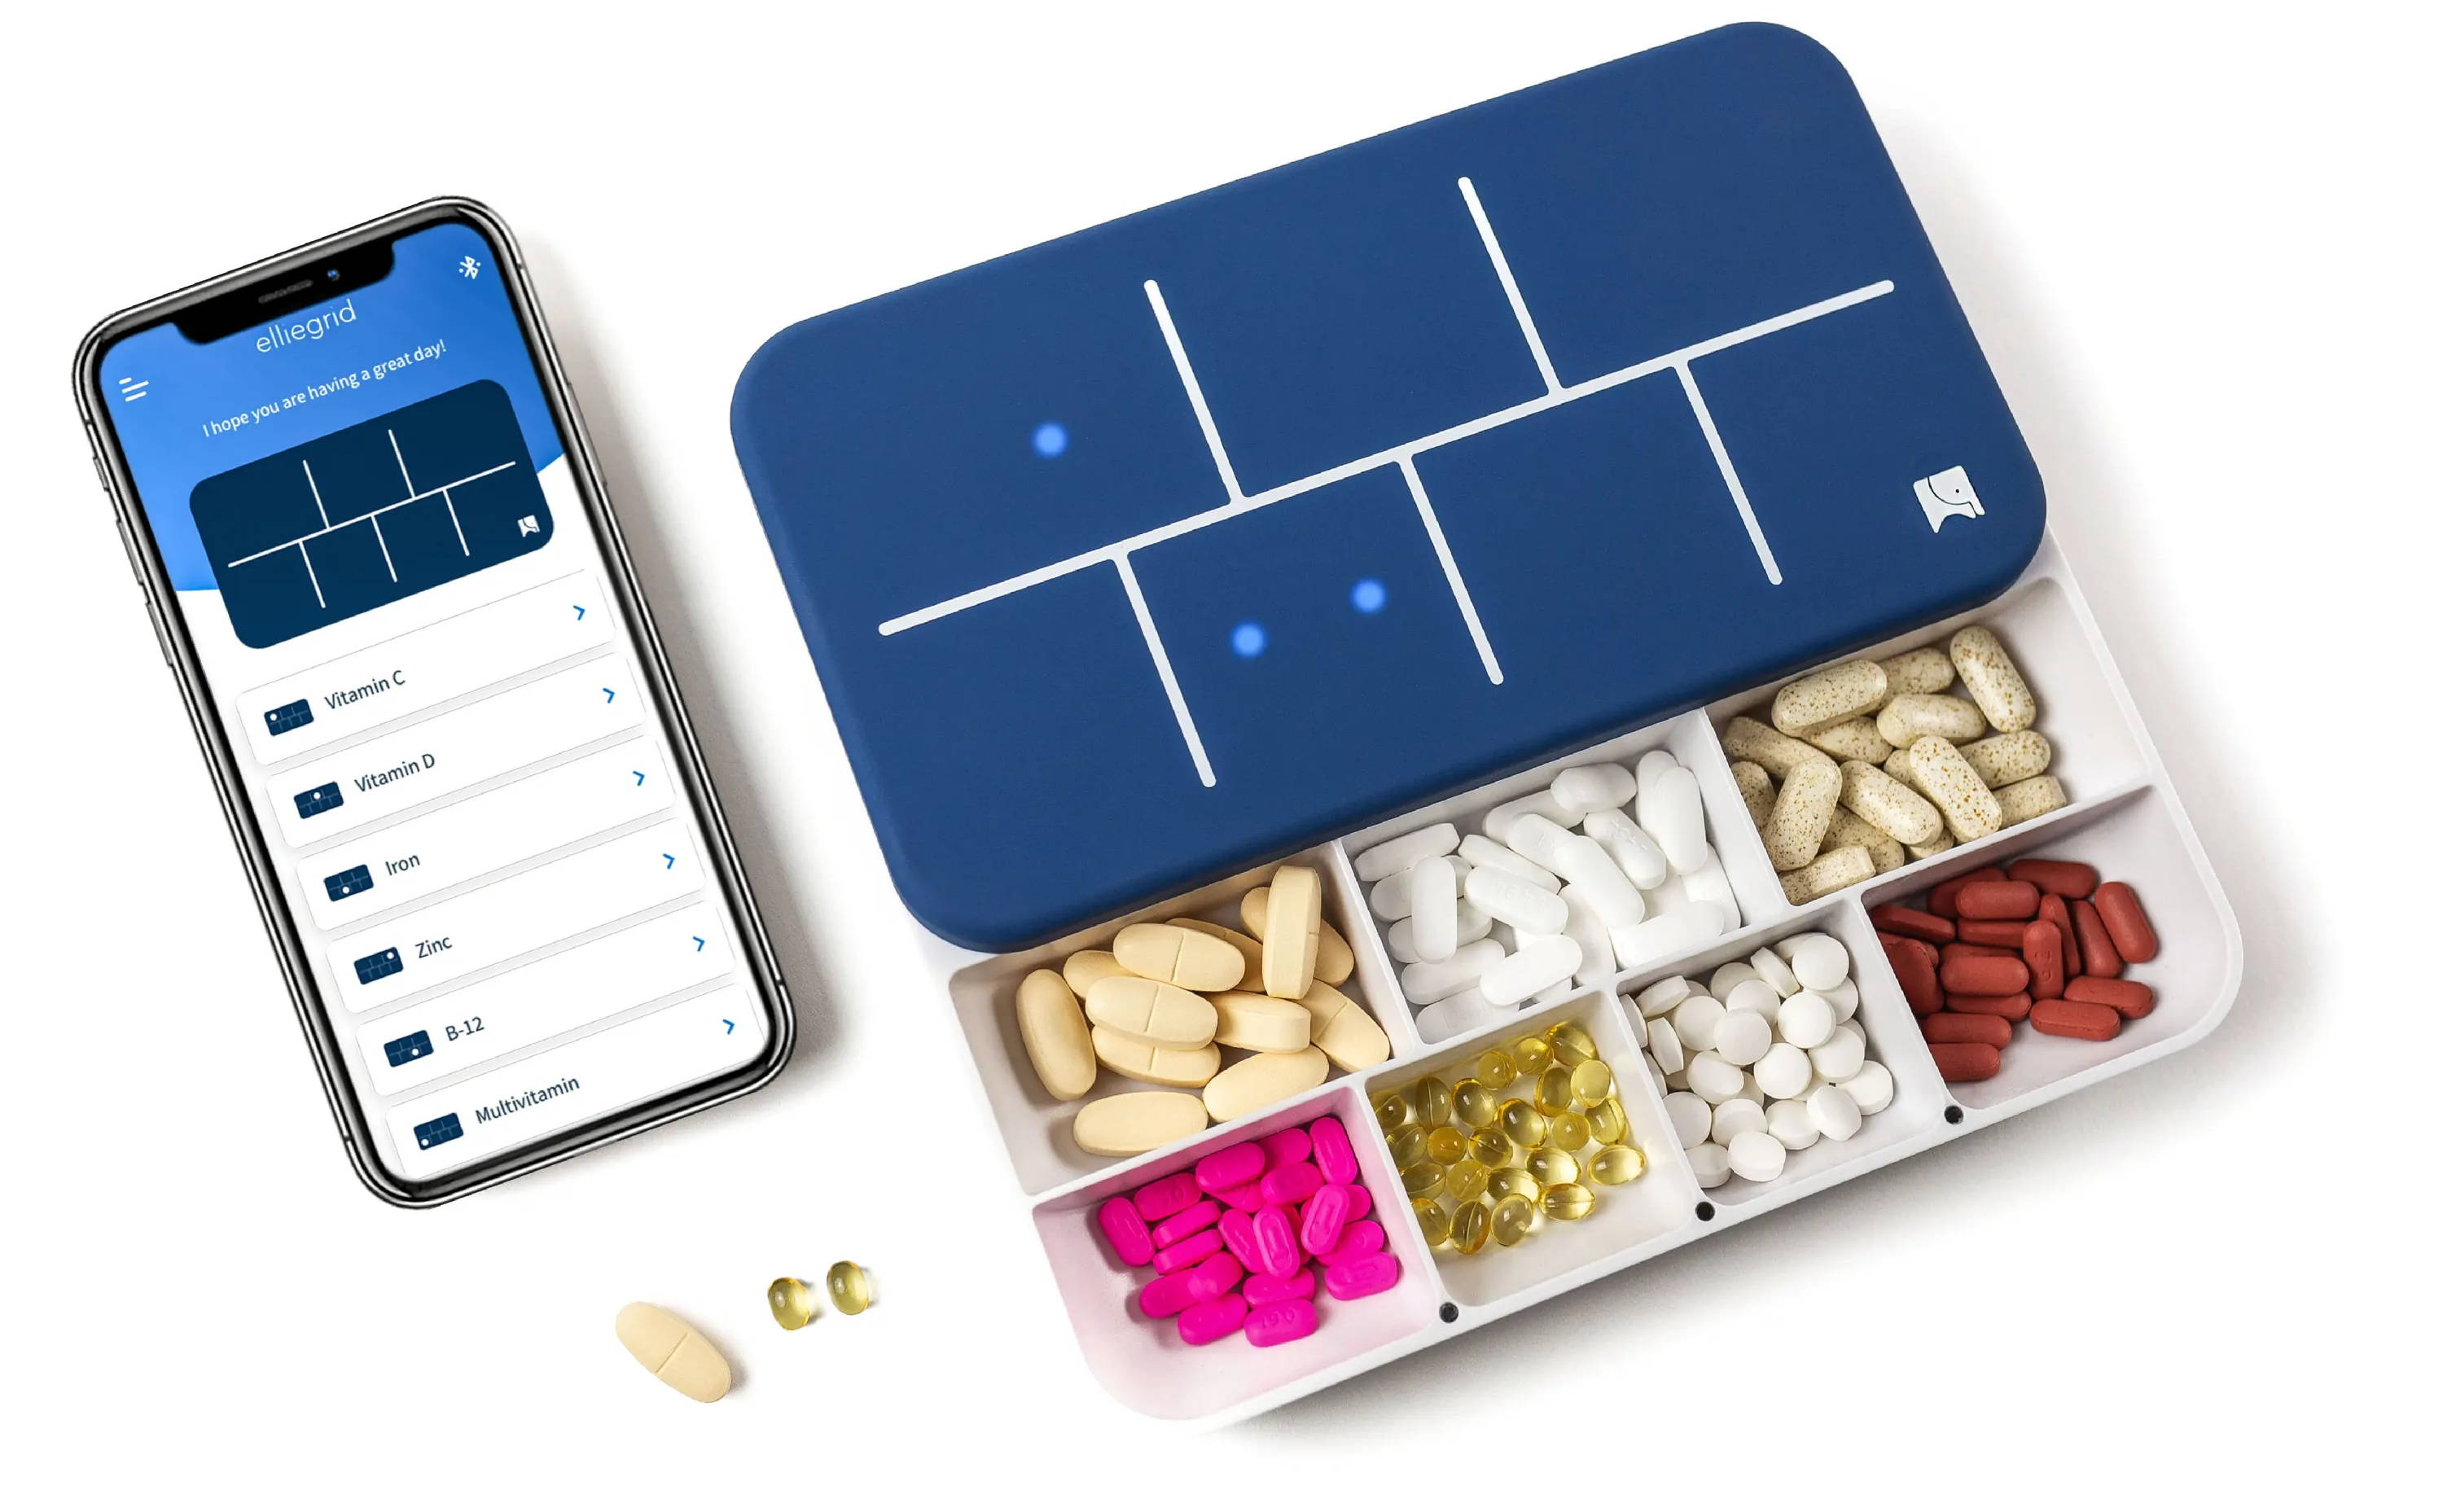 Want A Cute 14 Day Pill Organizer? Browse Our Collection. – Dosey Inc